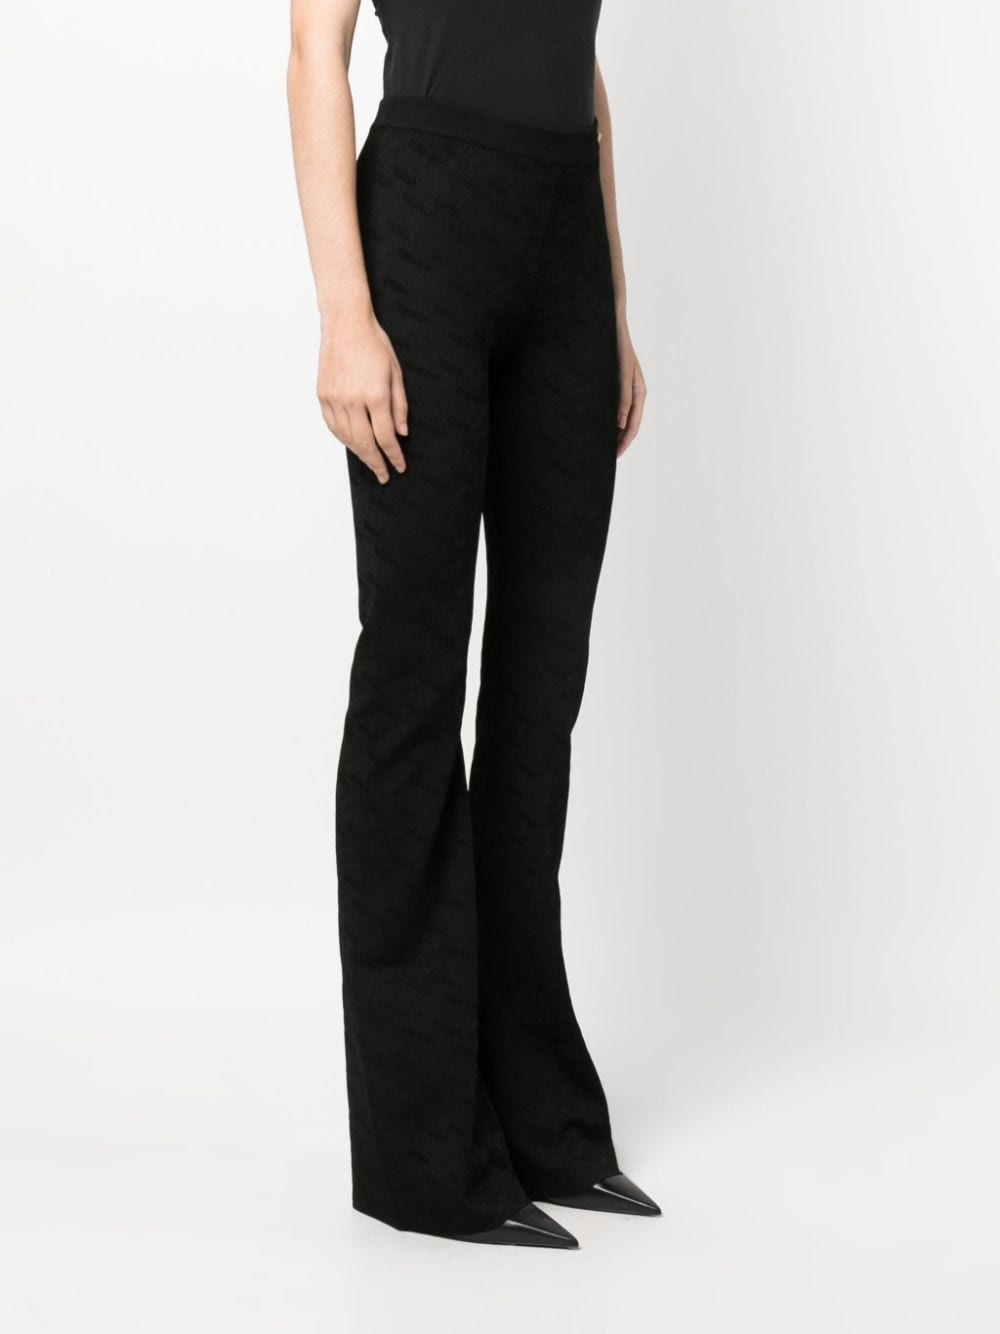 Greca-knit flared trousers - 3